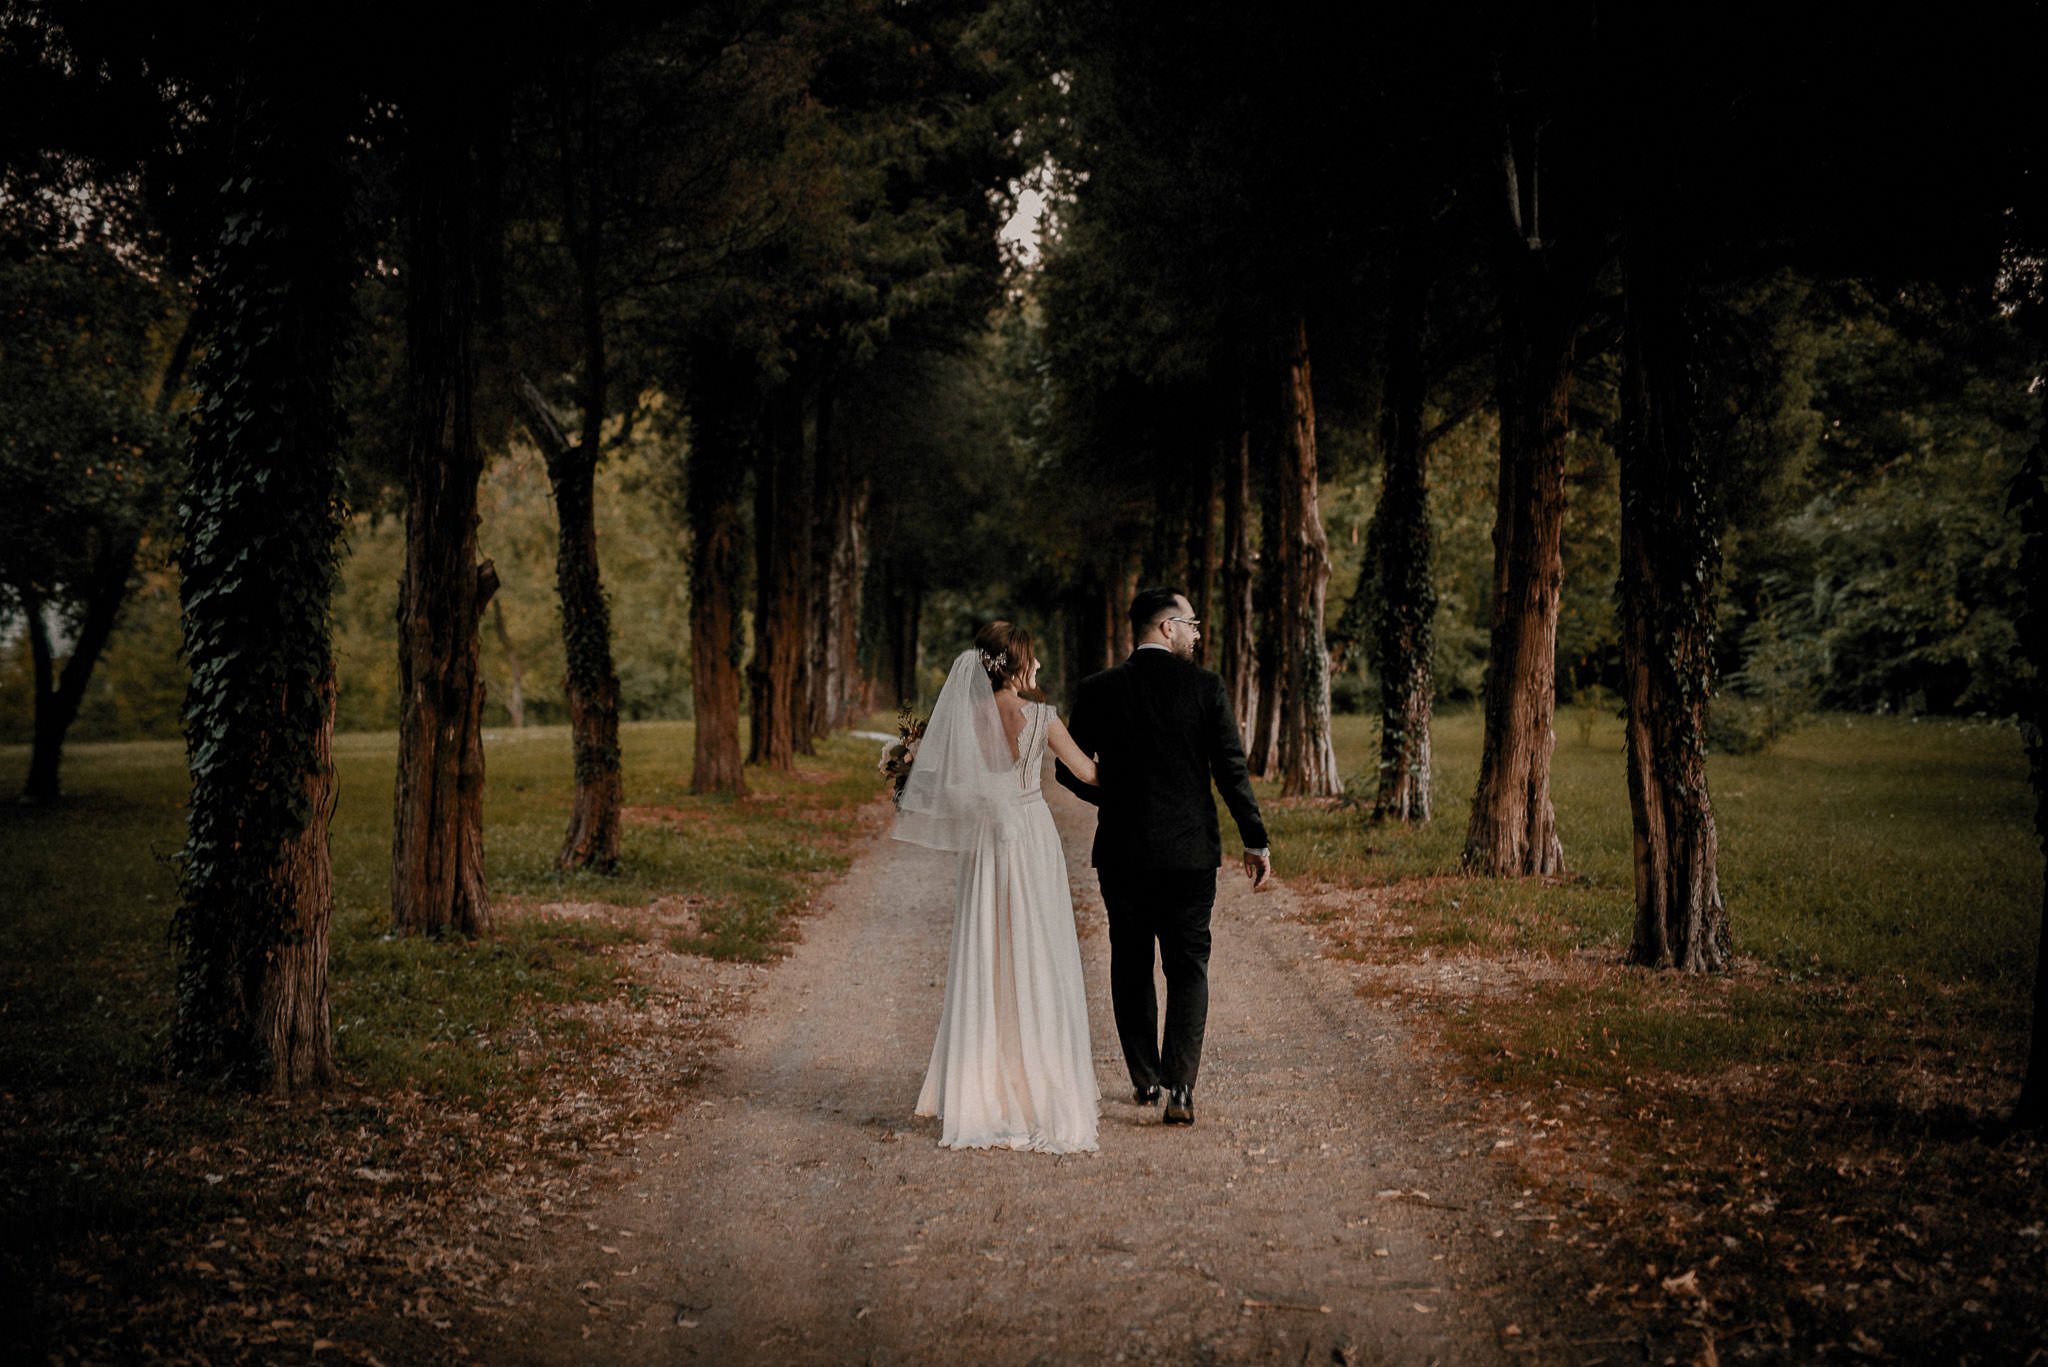 bride and groom walk down together surrounded by trees and nature during their intimate garden wedding